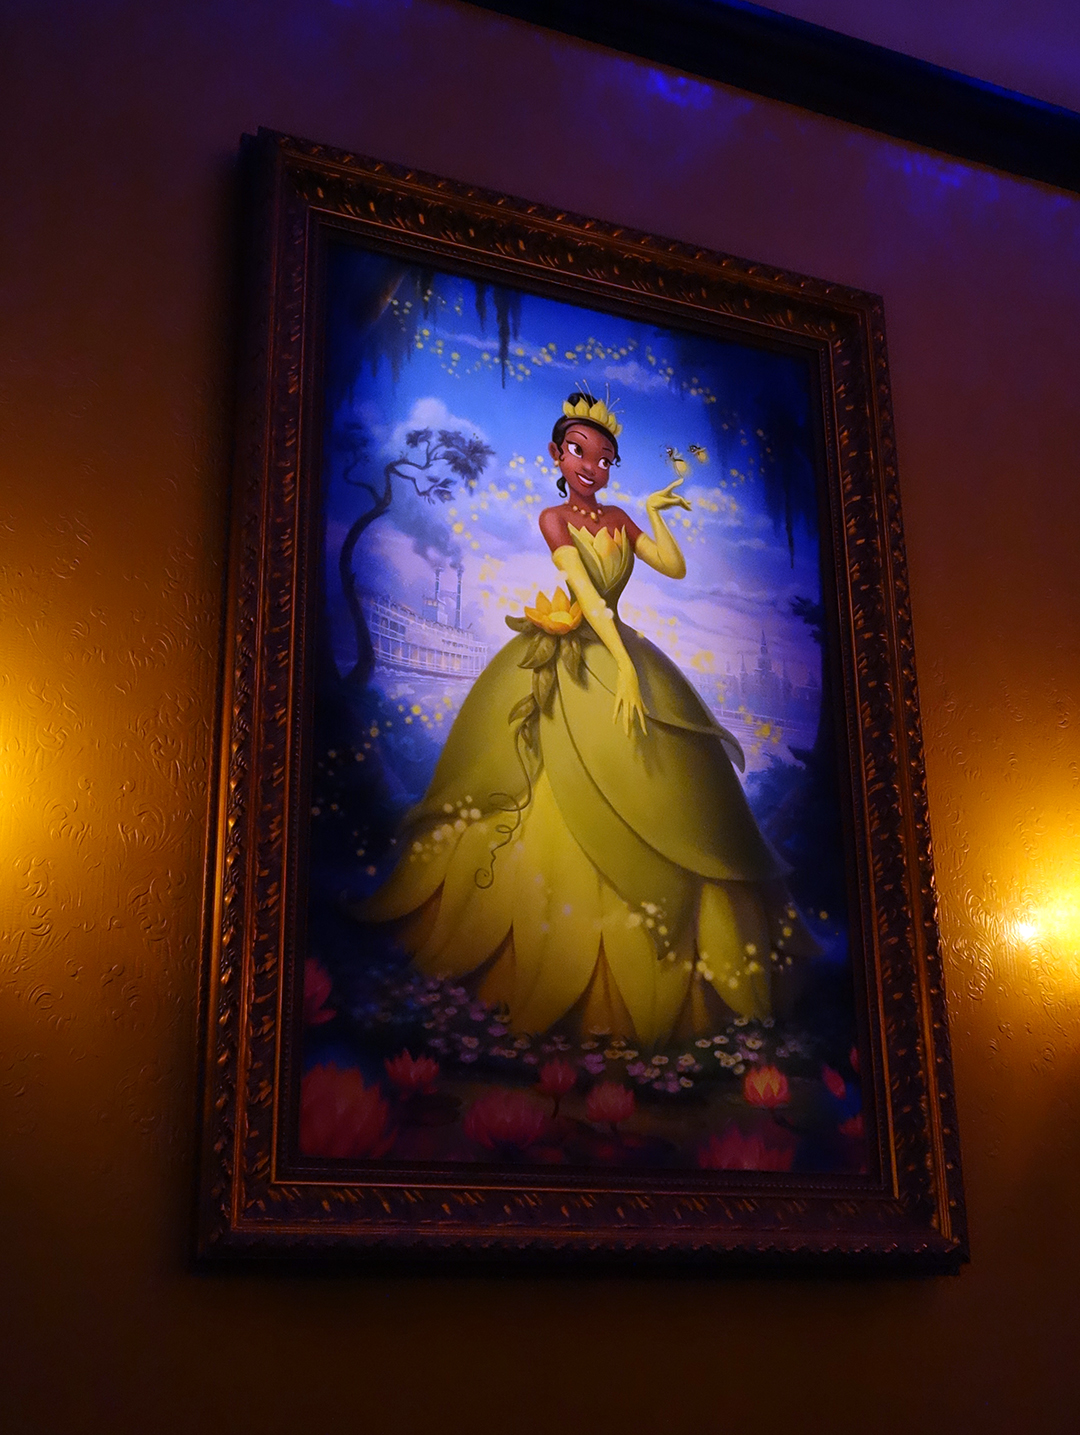 Tiana still meets in the glade, but it's a pretty picture, right?